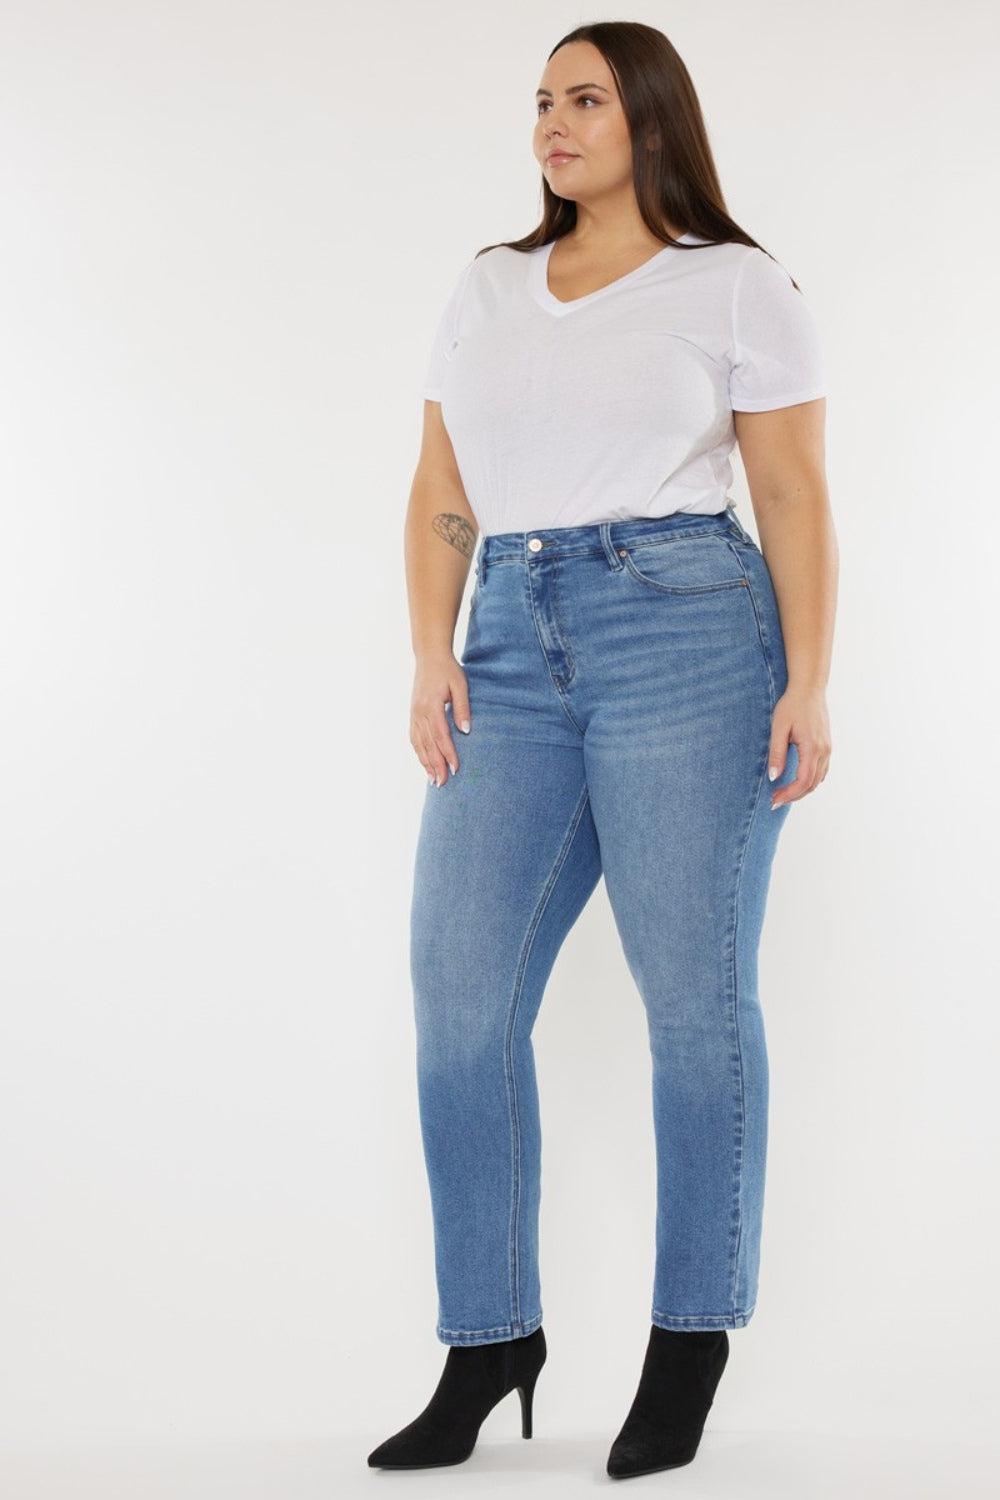 a woman wearing a white t - shirt and jeans